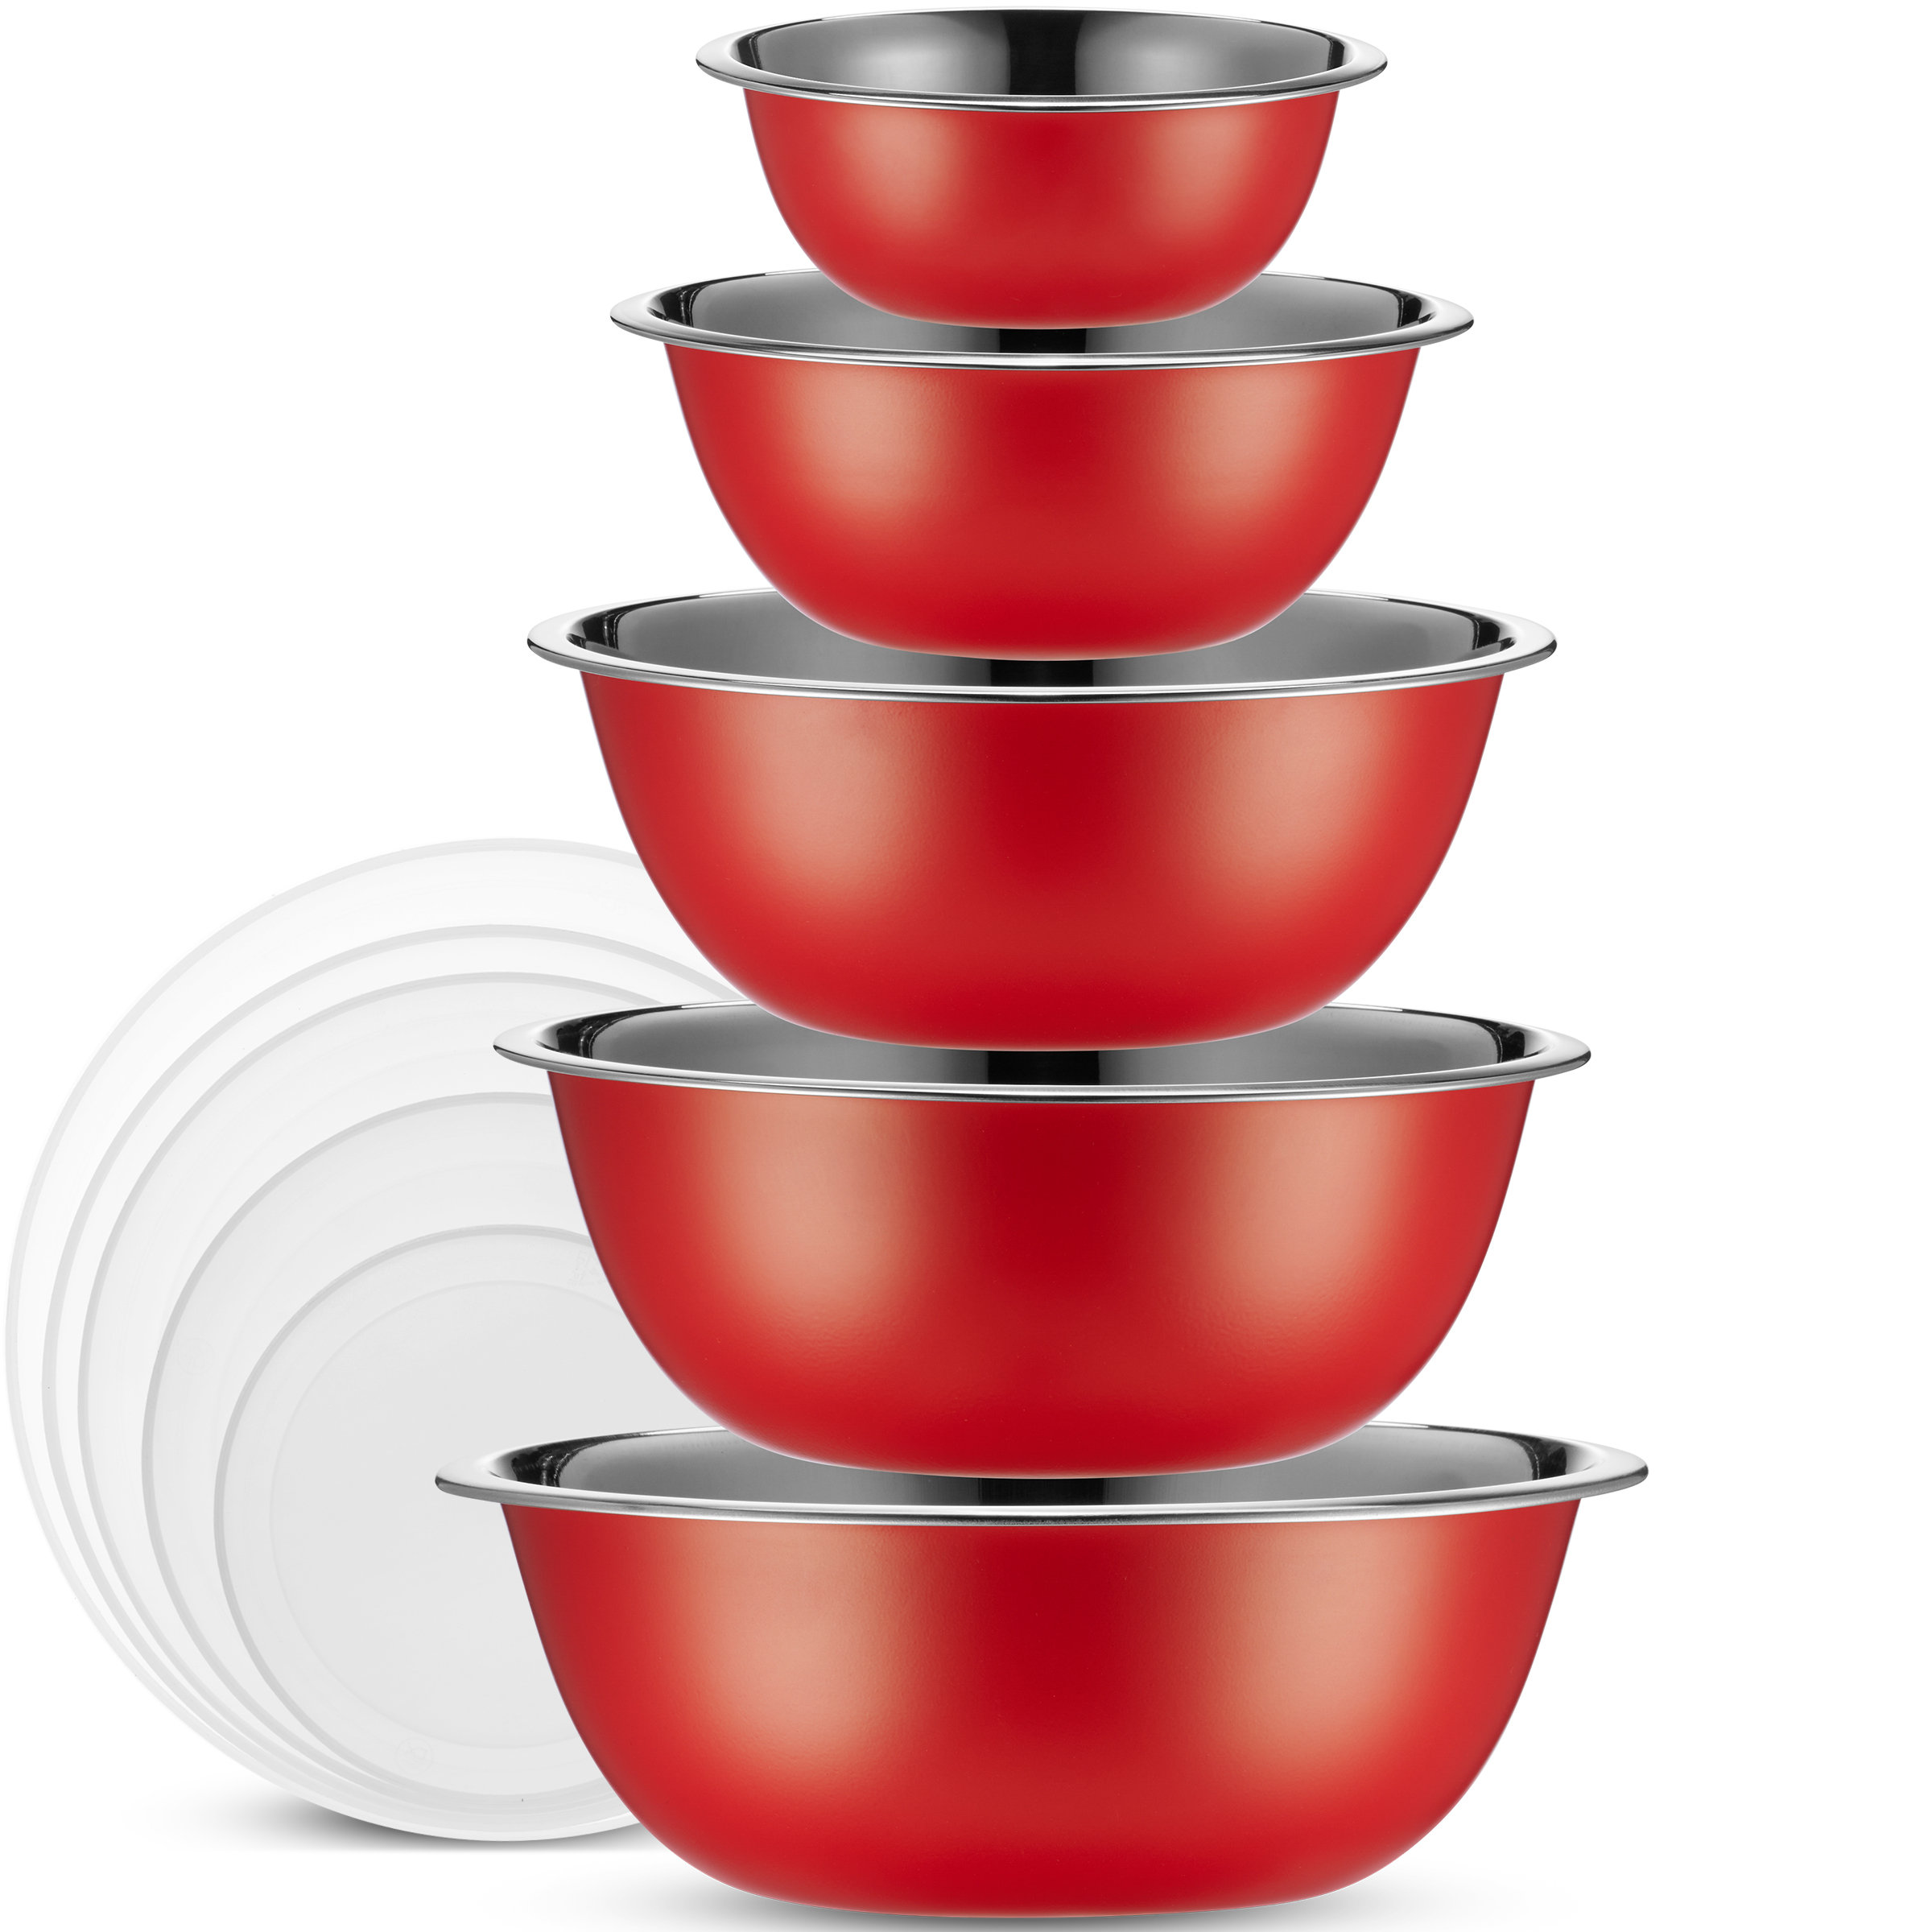 14-Piece Glass Bowls with Lids, Glass Salad Bowls Set - for Baking,  Cooking, Meal Prep and Kitchen Food Storage - Nesting and Microwave Safe 